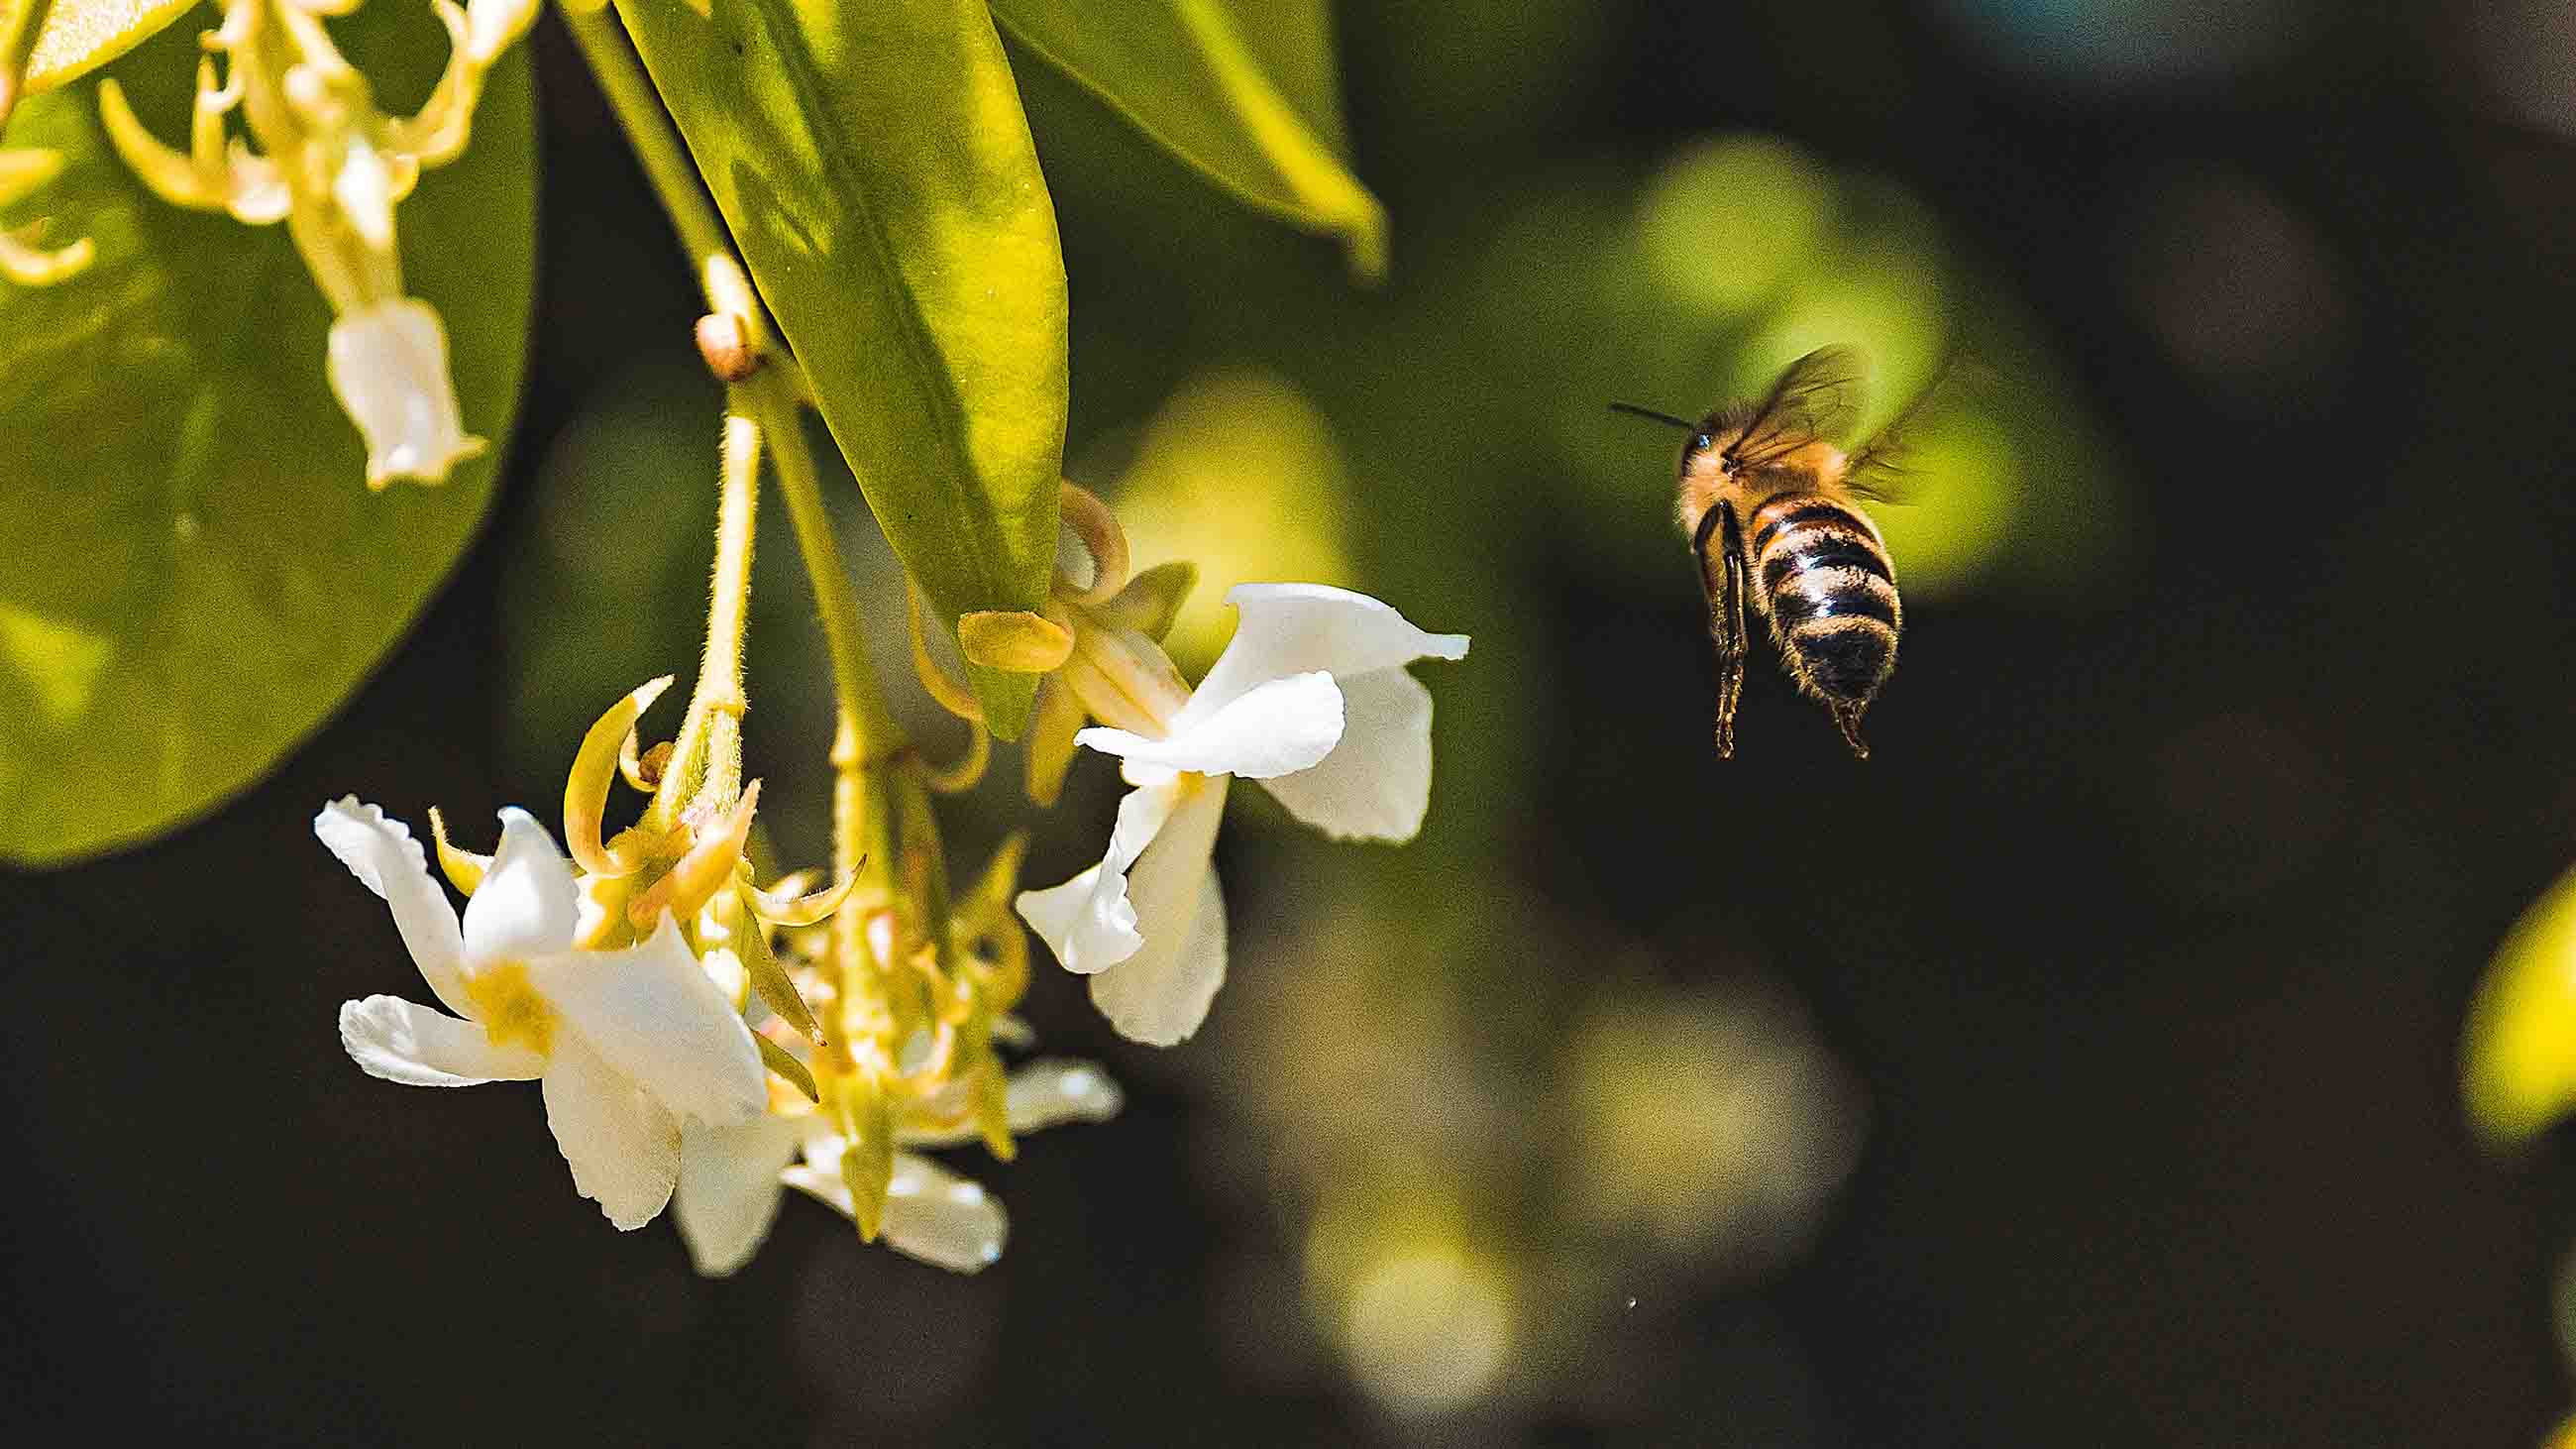 New research finds that neonicotinoids kill bee colonies over an extended period of time.